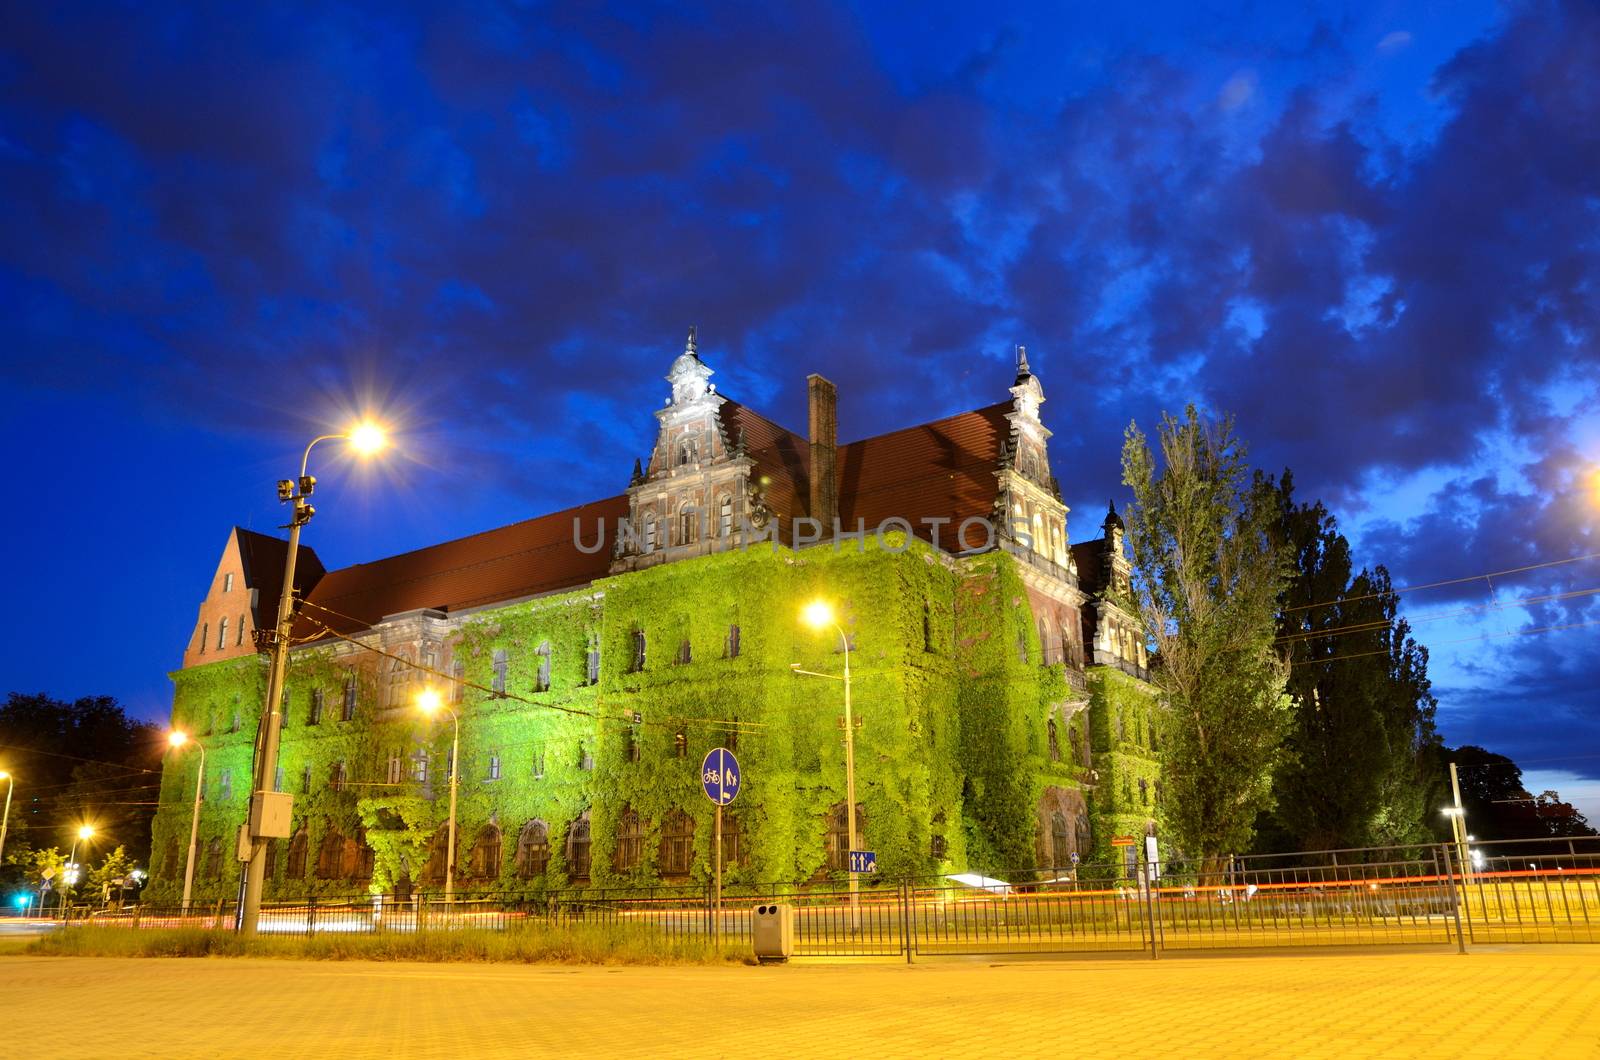 WROCLAW, POLAND - MAY 30: Wroclaw's National Museum, historical building  by night. In 2016 Wroclaw is European Capitol of Culture. 